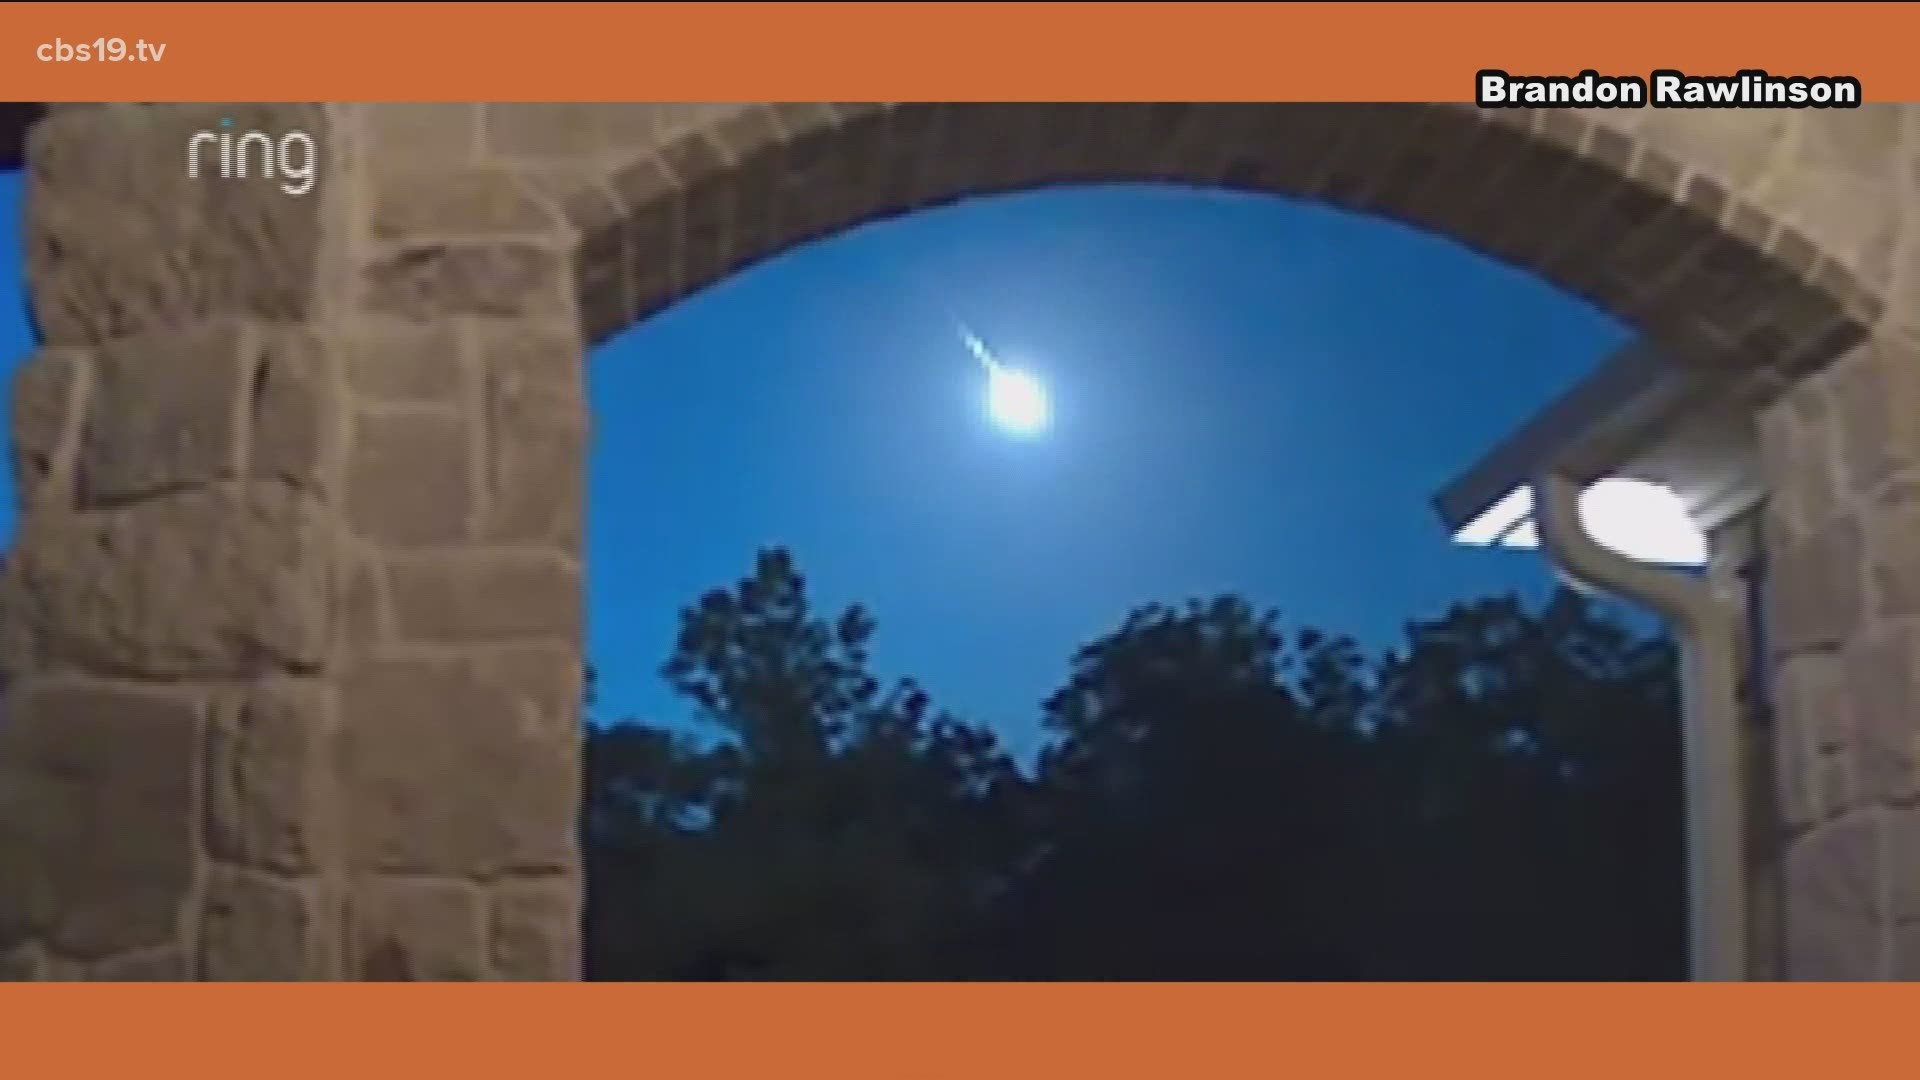 Did you see the meteor? Email your pictures and videos to news@cbs19.tv.